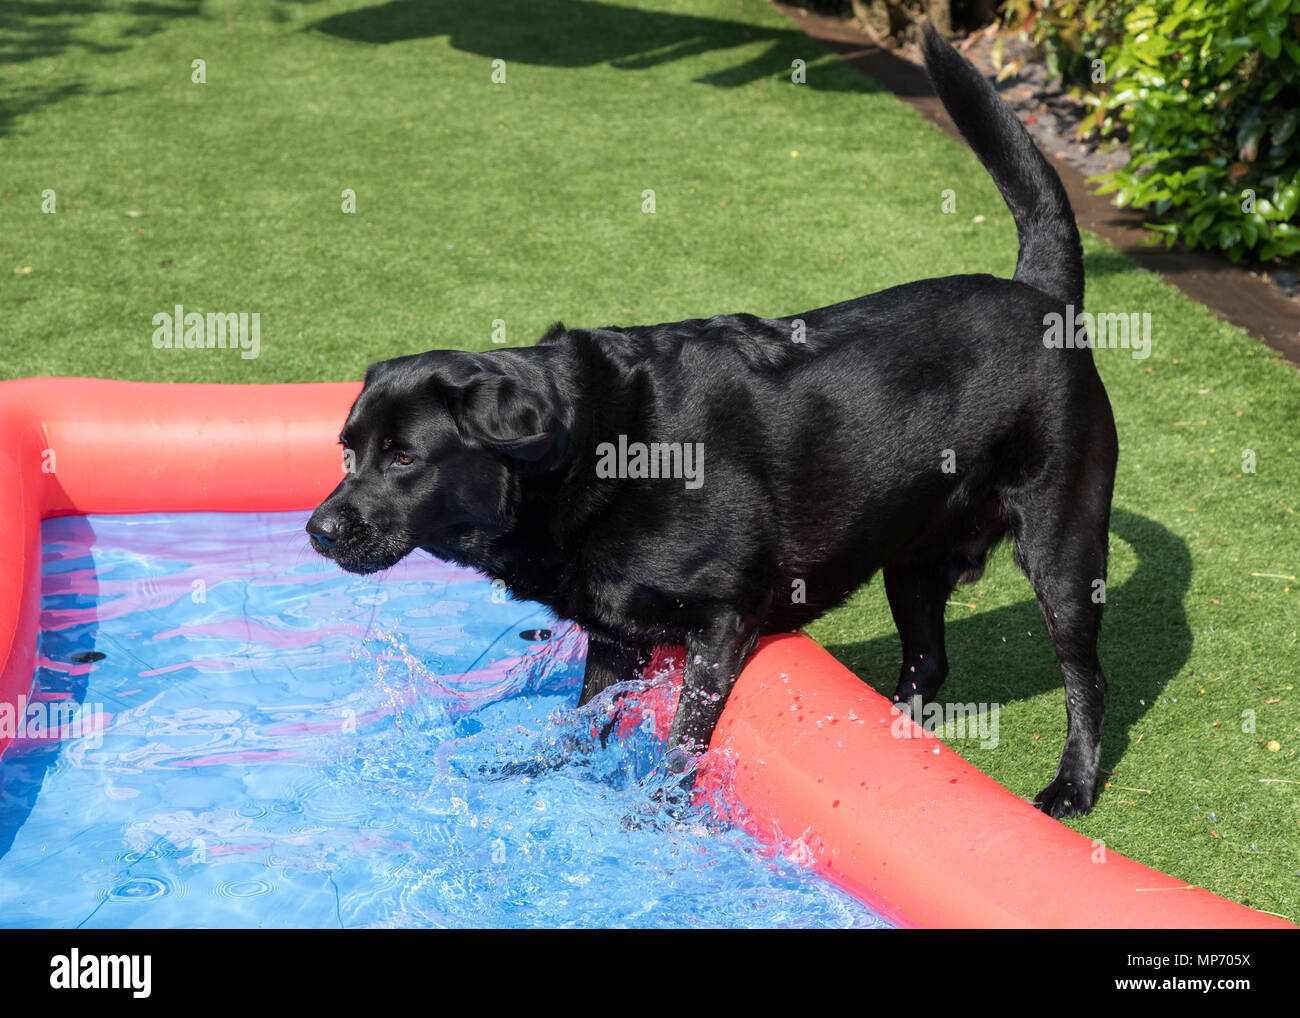 Black Labrador plays in a paddling pool in a garden / Adult male Labrador in paddling pool Stock Photo